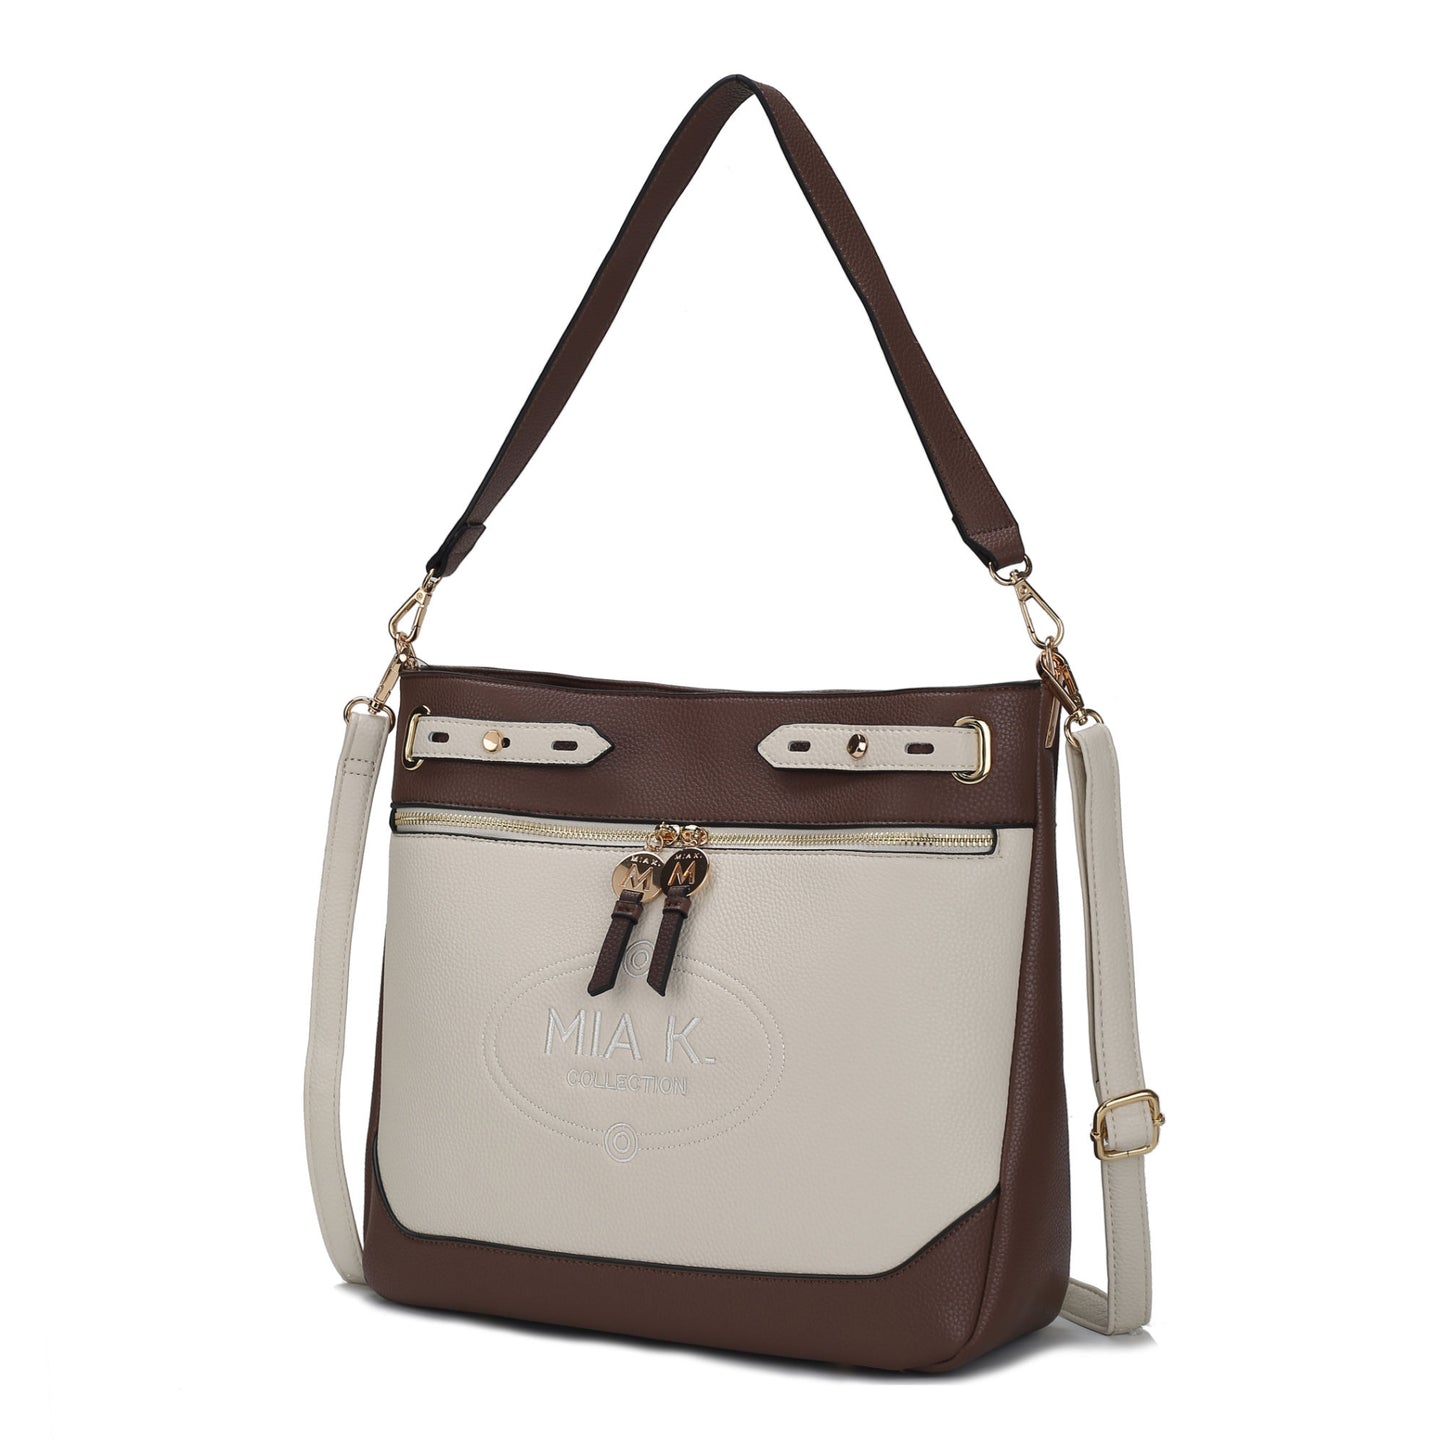 MKF Collection Evie two tone Vegan Leather Women Shoulder bag by Mia k